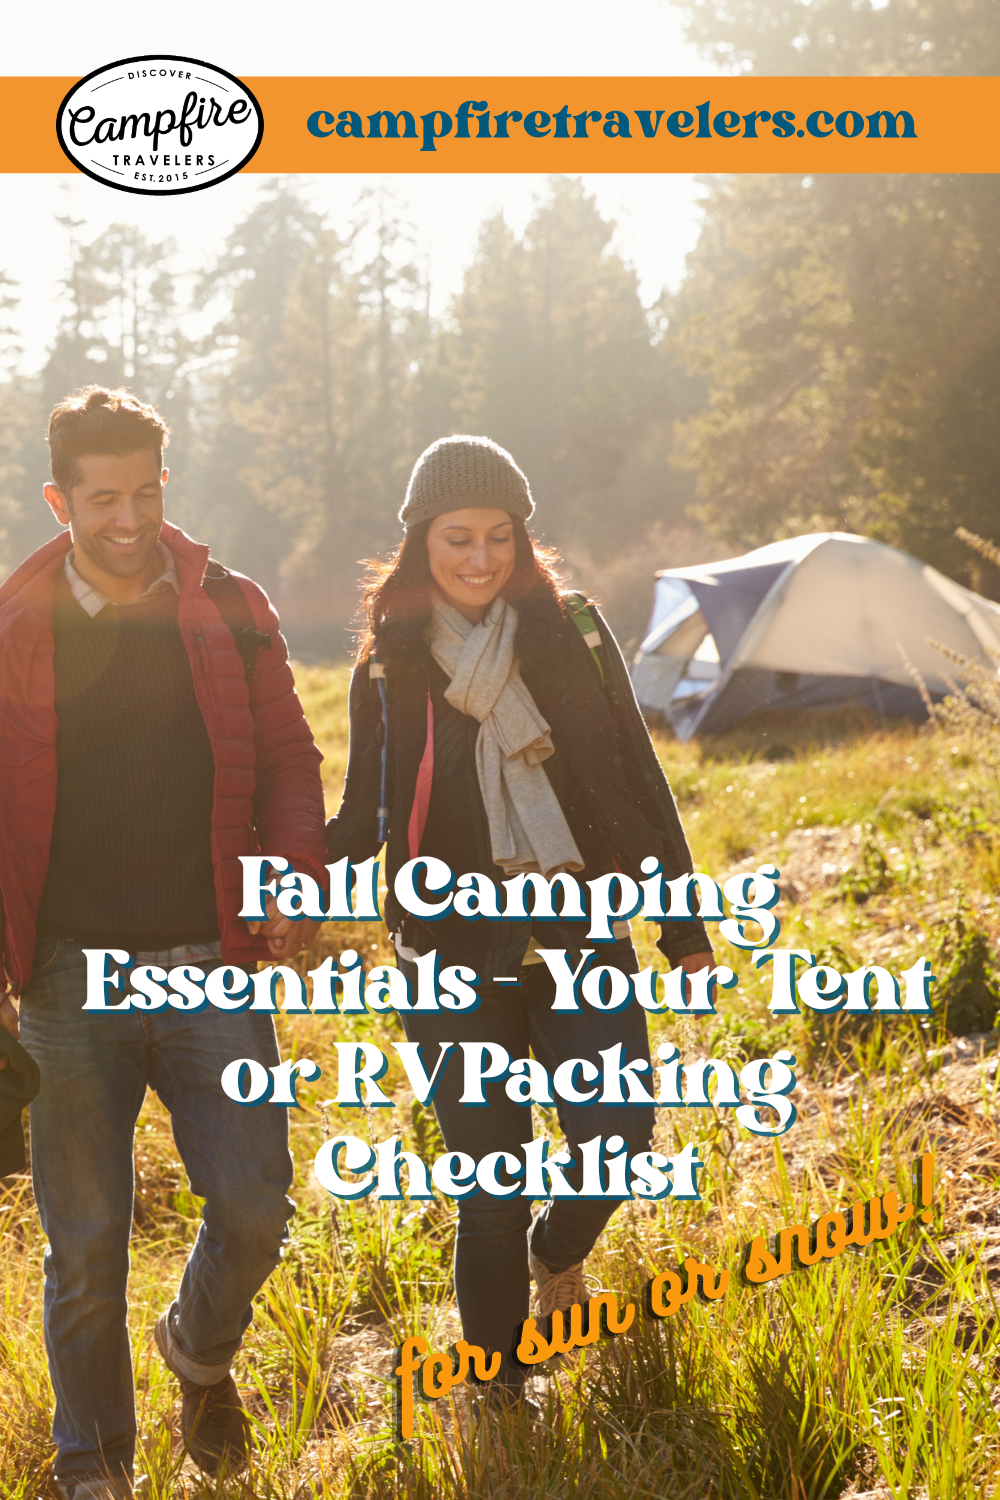 Fall Camping Essentials - Your Tent or RV Packing Checklist